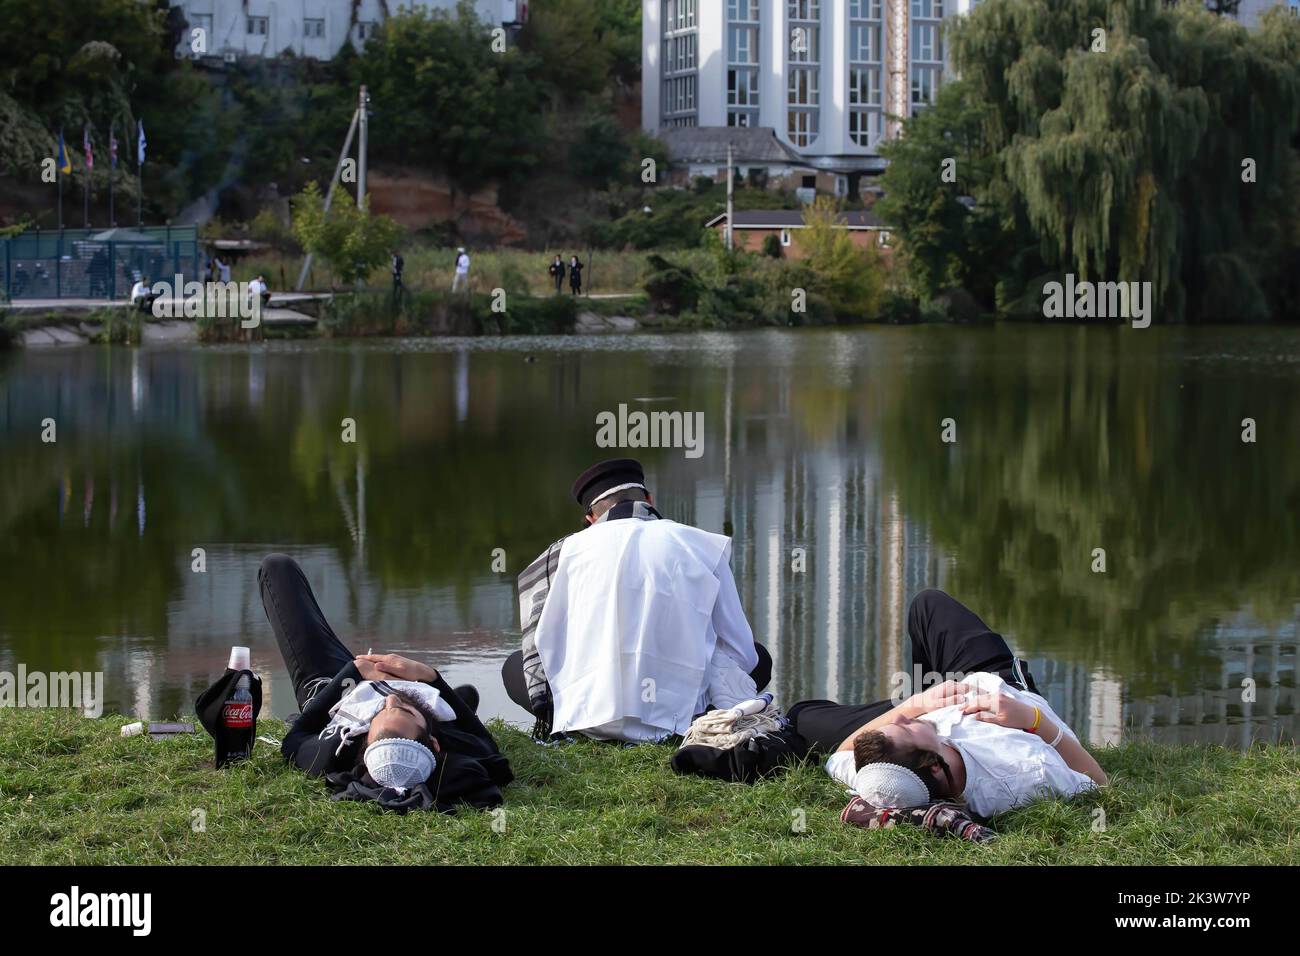 Ultra-Orthodox Jewish pilgrims seen resting next to the river of Umanka near the tomb of Rabbi Nachman during the celebration. Every year, thousands of Orthodox Bratslav Hasidic Jews from different countries gather in Uman to mark Rosh Hashanah, Jewish New Year, near the tomb of Rabbi Nachman, a great-grandson of the founder of Hasidism. Stock Photo